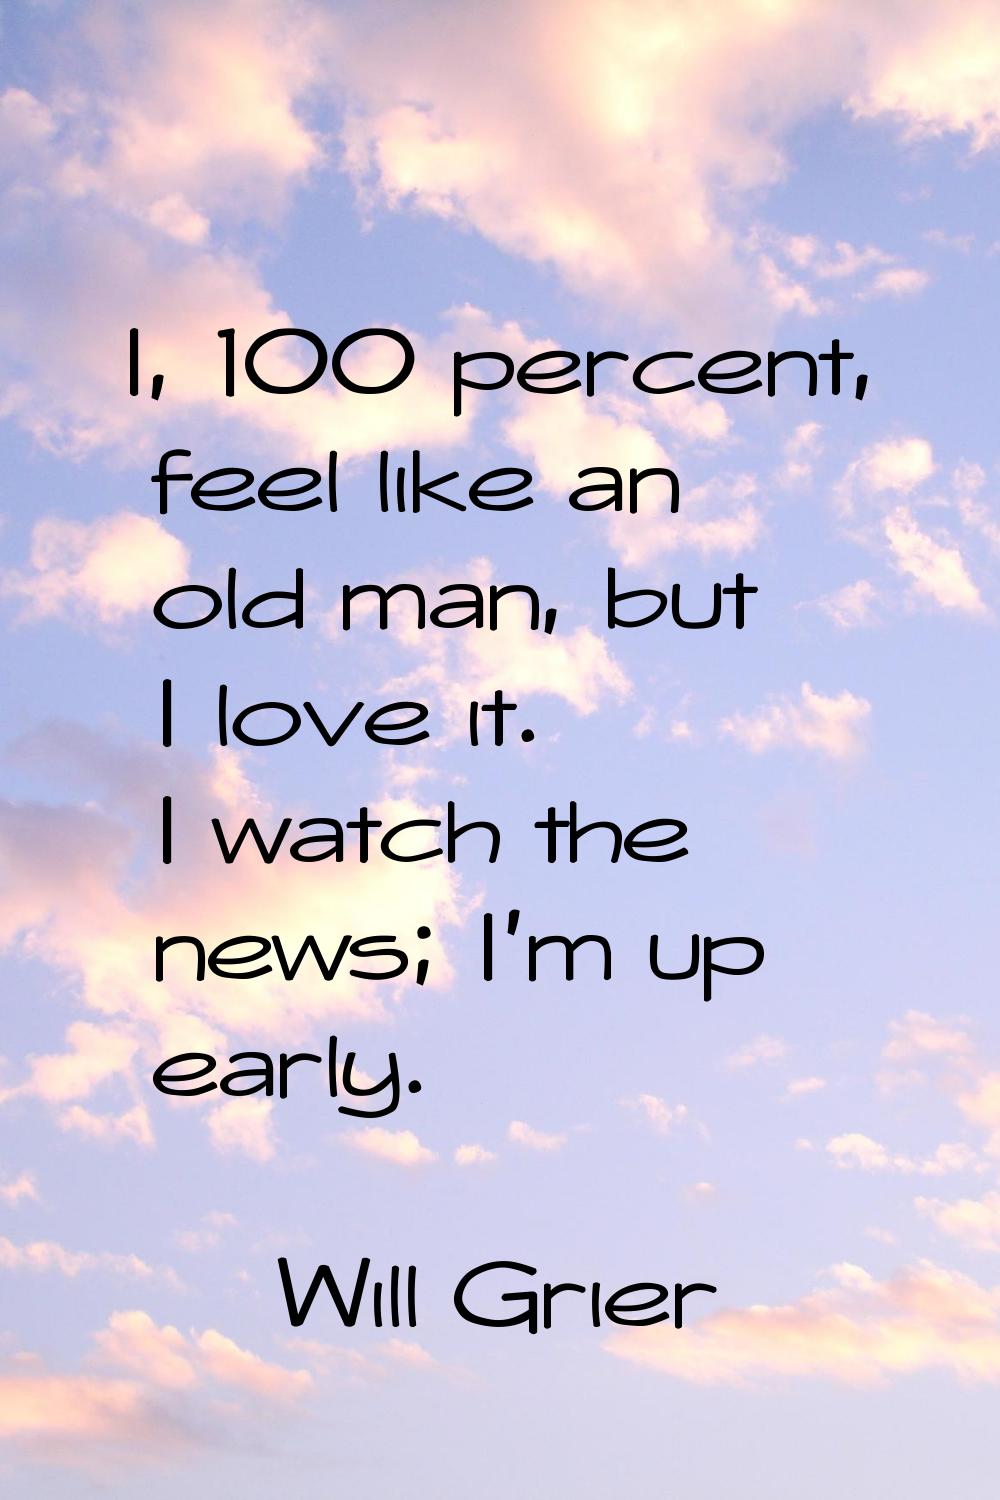 I, 100 percent, feel like an old man, but I love it. I watch the news; I'm up early.